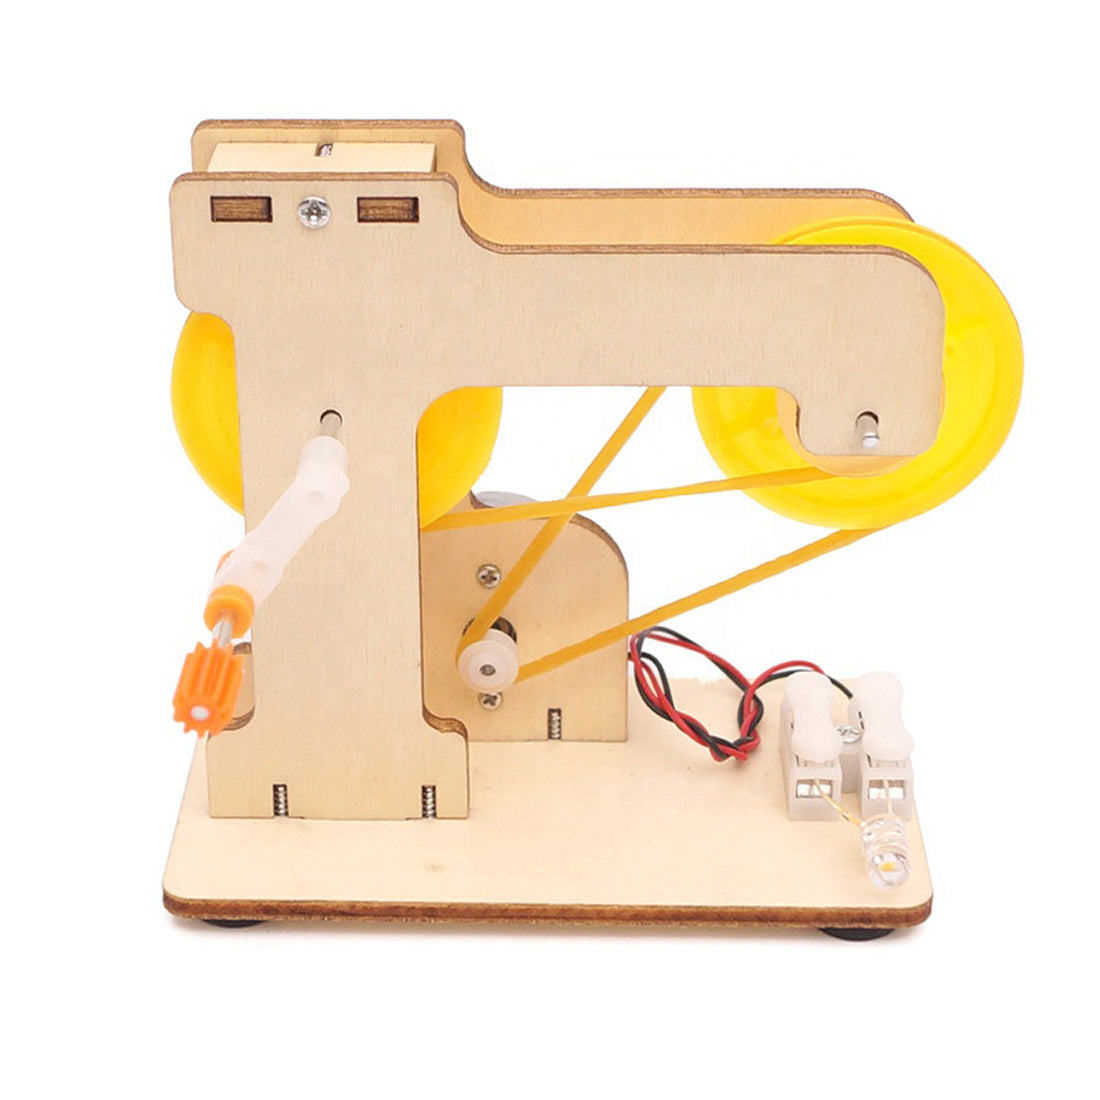 diy-hand-crank-power-generator-physical-learning-toy-science-experiment-kit.jpg